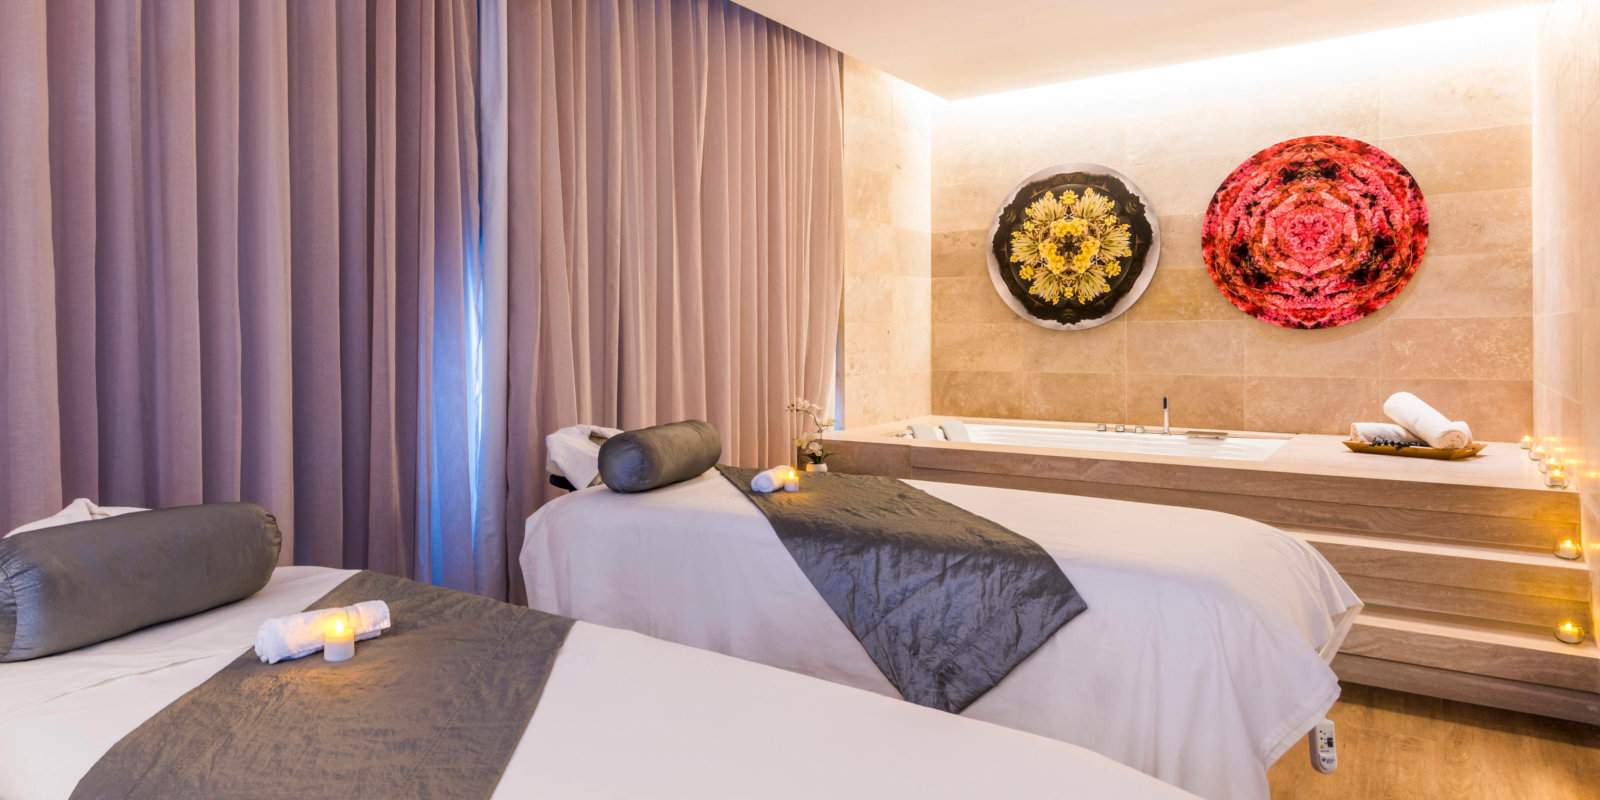 Gay travellers to Medellin will love staying at the Medellin Marriott hotel, where you can have a very relaxing couples massage in the spa!